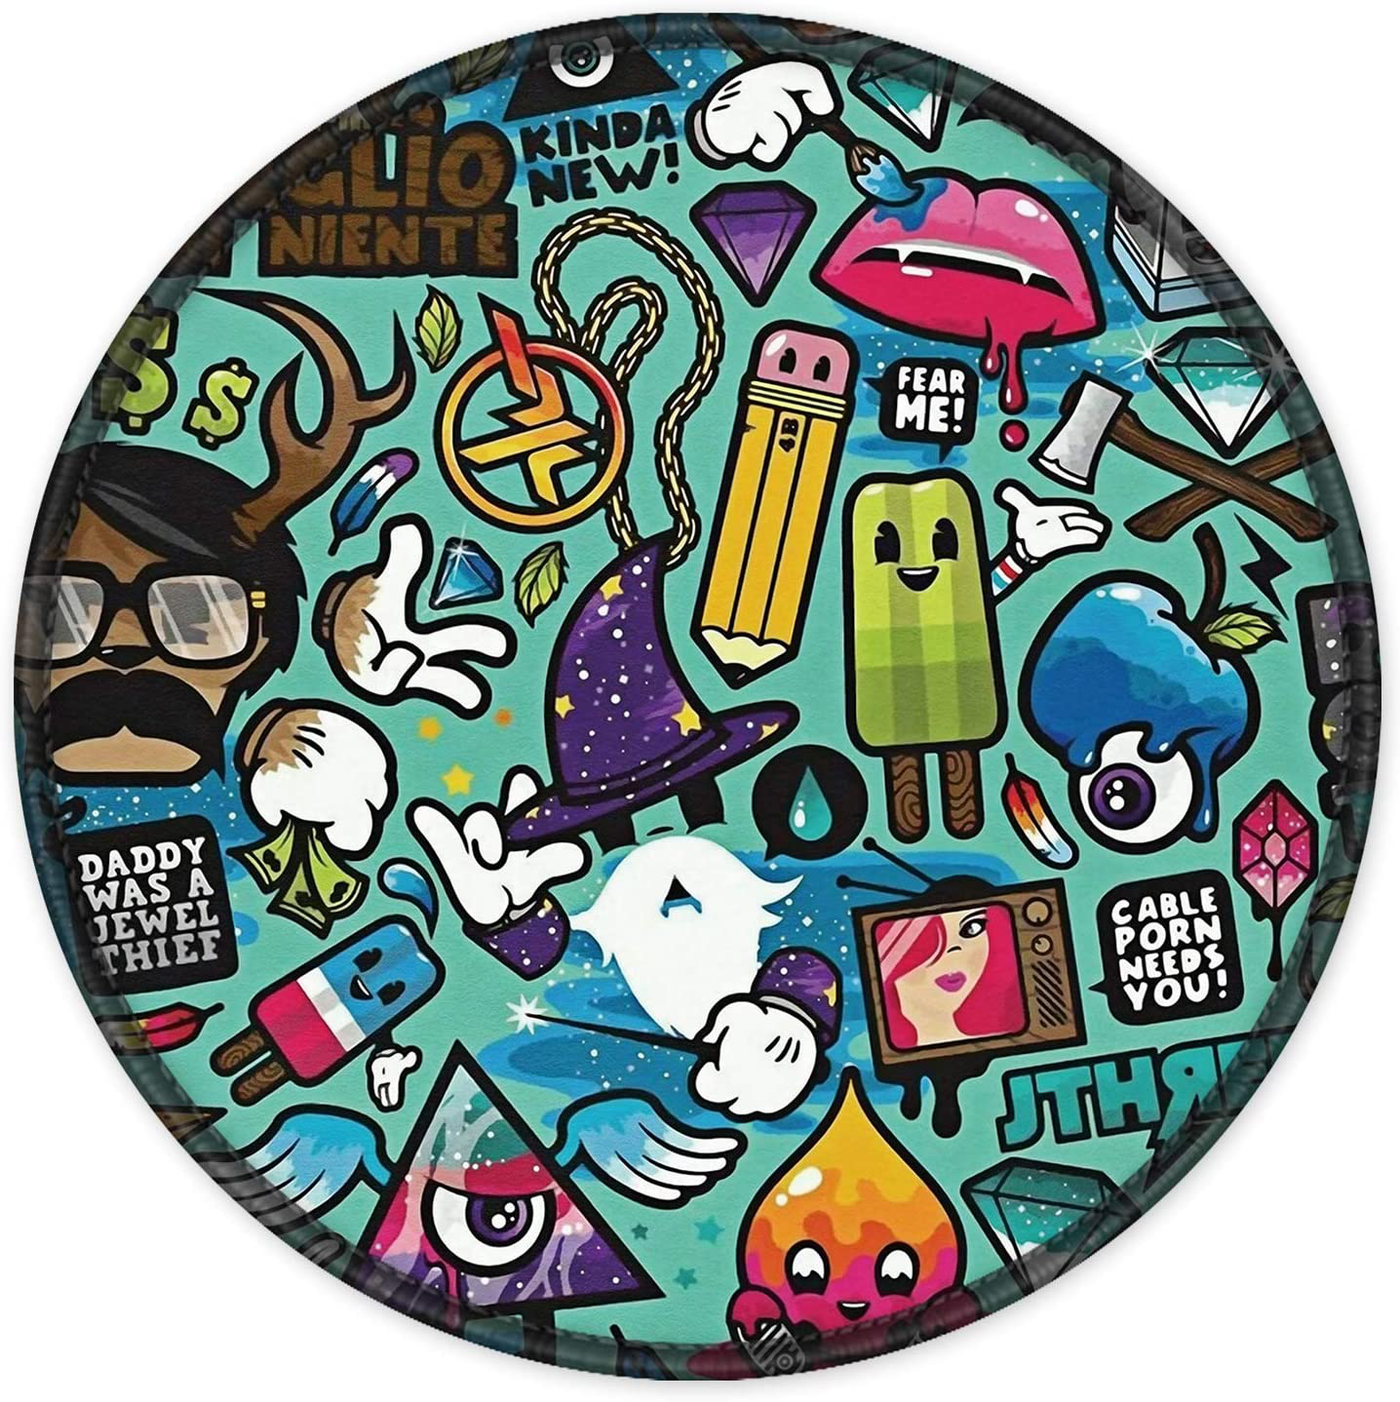 ITNRSIIET Mouse Pad, Colorful Geometric Pattern Design Round Mousepad. Customized Gaming Mousepads for Laptop and Computer. Cute Design Desk Accessories. Non-Slip, Stitched Edges, Waterproof